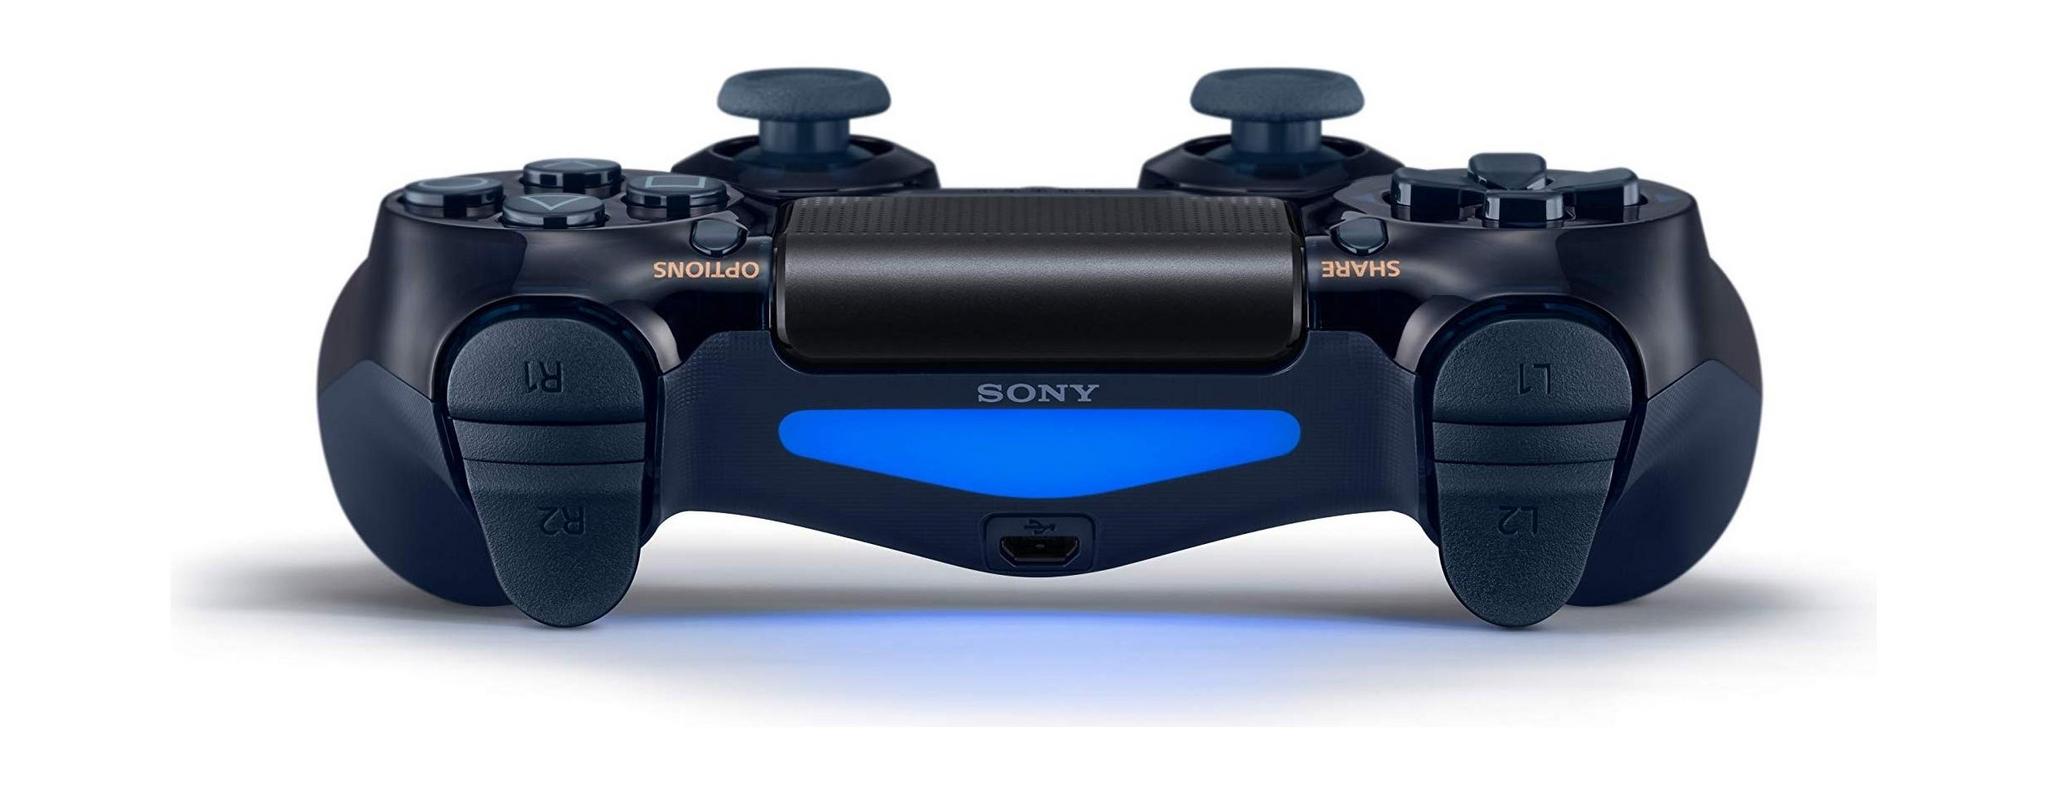 Sony PS4 DualShock 4 500M Limited Edition Controller - Blue